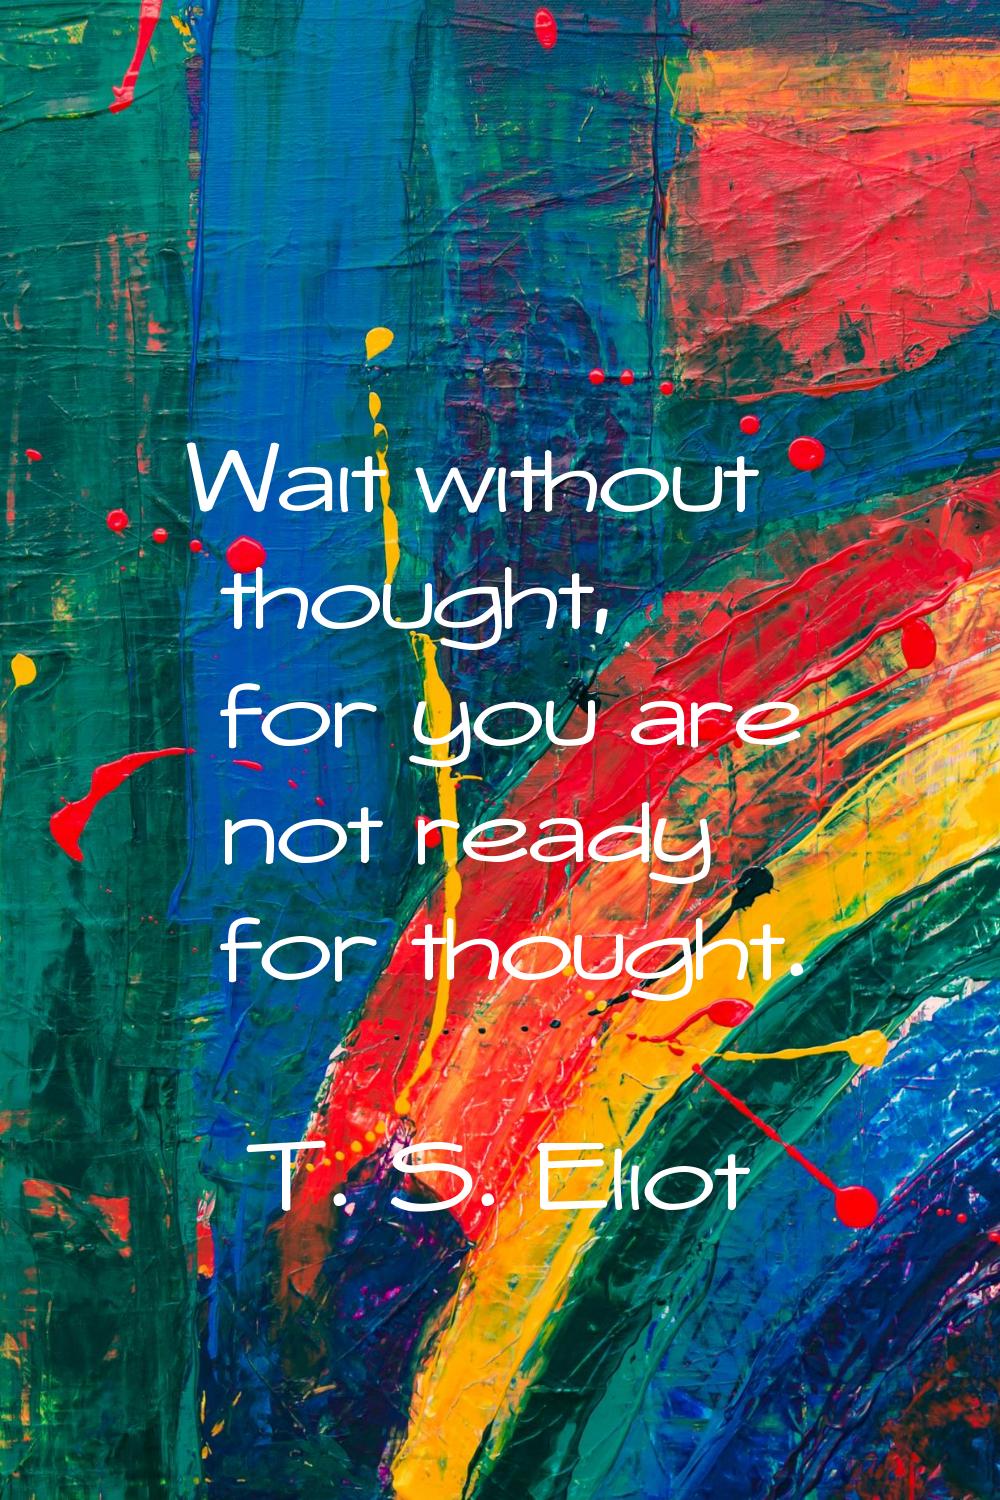 Wait without thought, for you are not ready for thought.